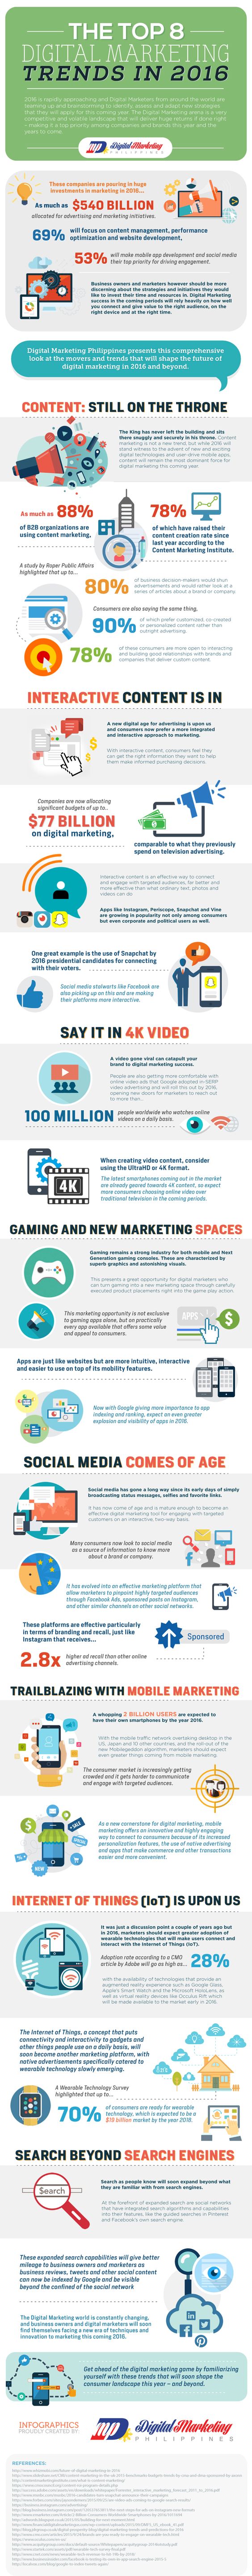 The Top 8 Digital Marketing Trends in 2016 (Infographic)